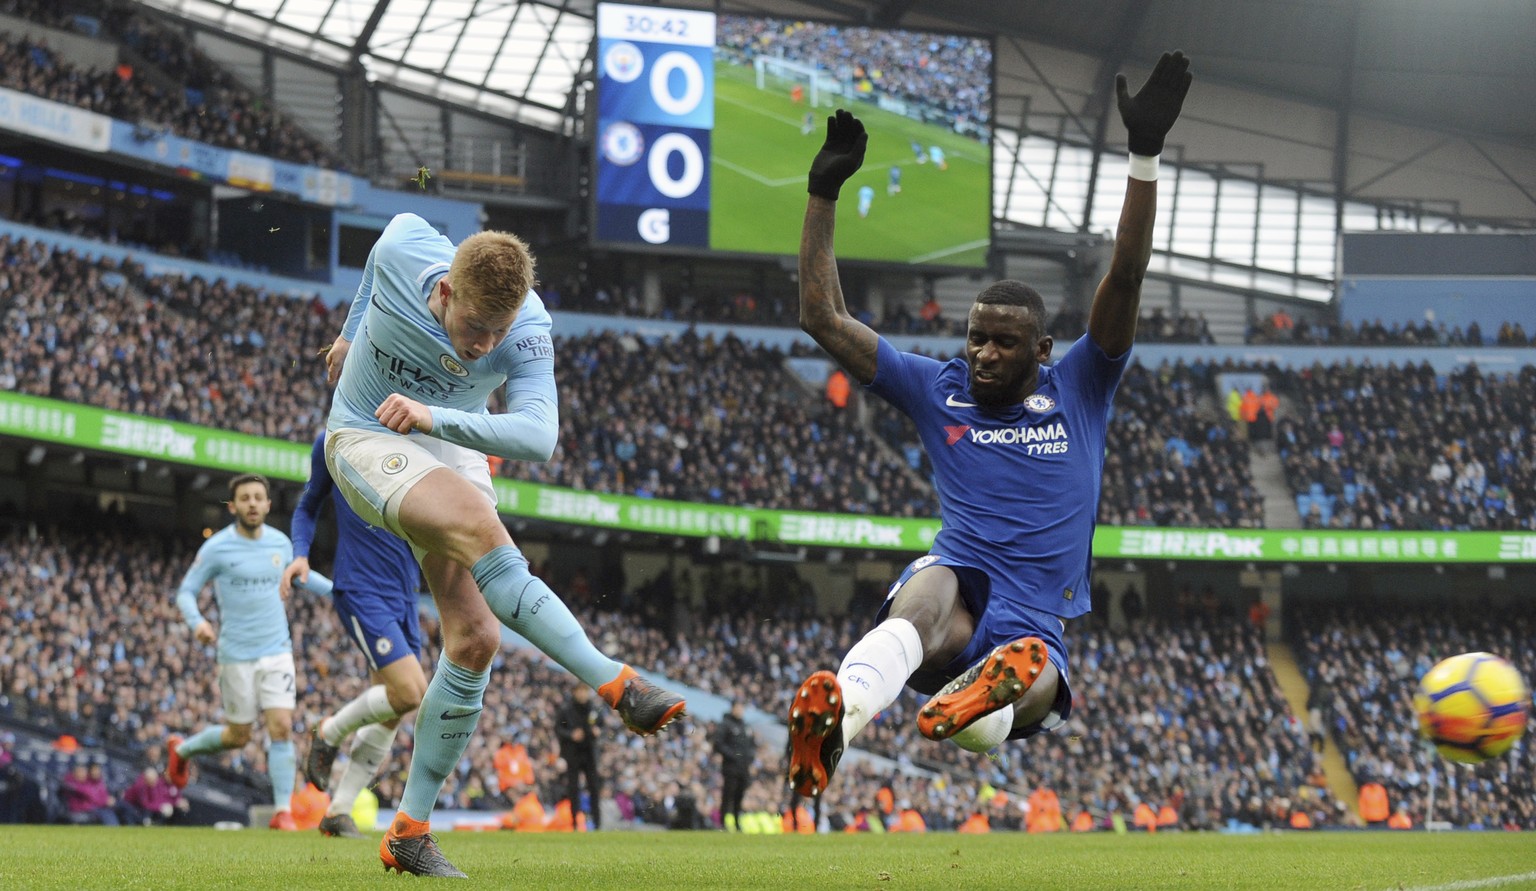 Manchester City&#039;s Kevin De Bruyne, left, tries to score as Chelsea&#039;s Antonio Rudiger defend during the English Premier League soccer match between Manchester City and Chelsea at the Etihad S ...